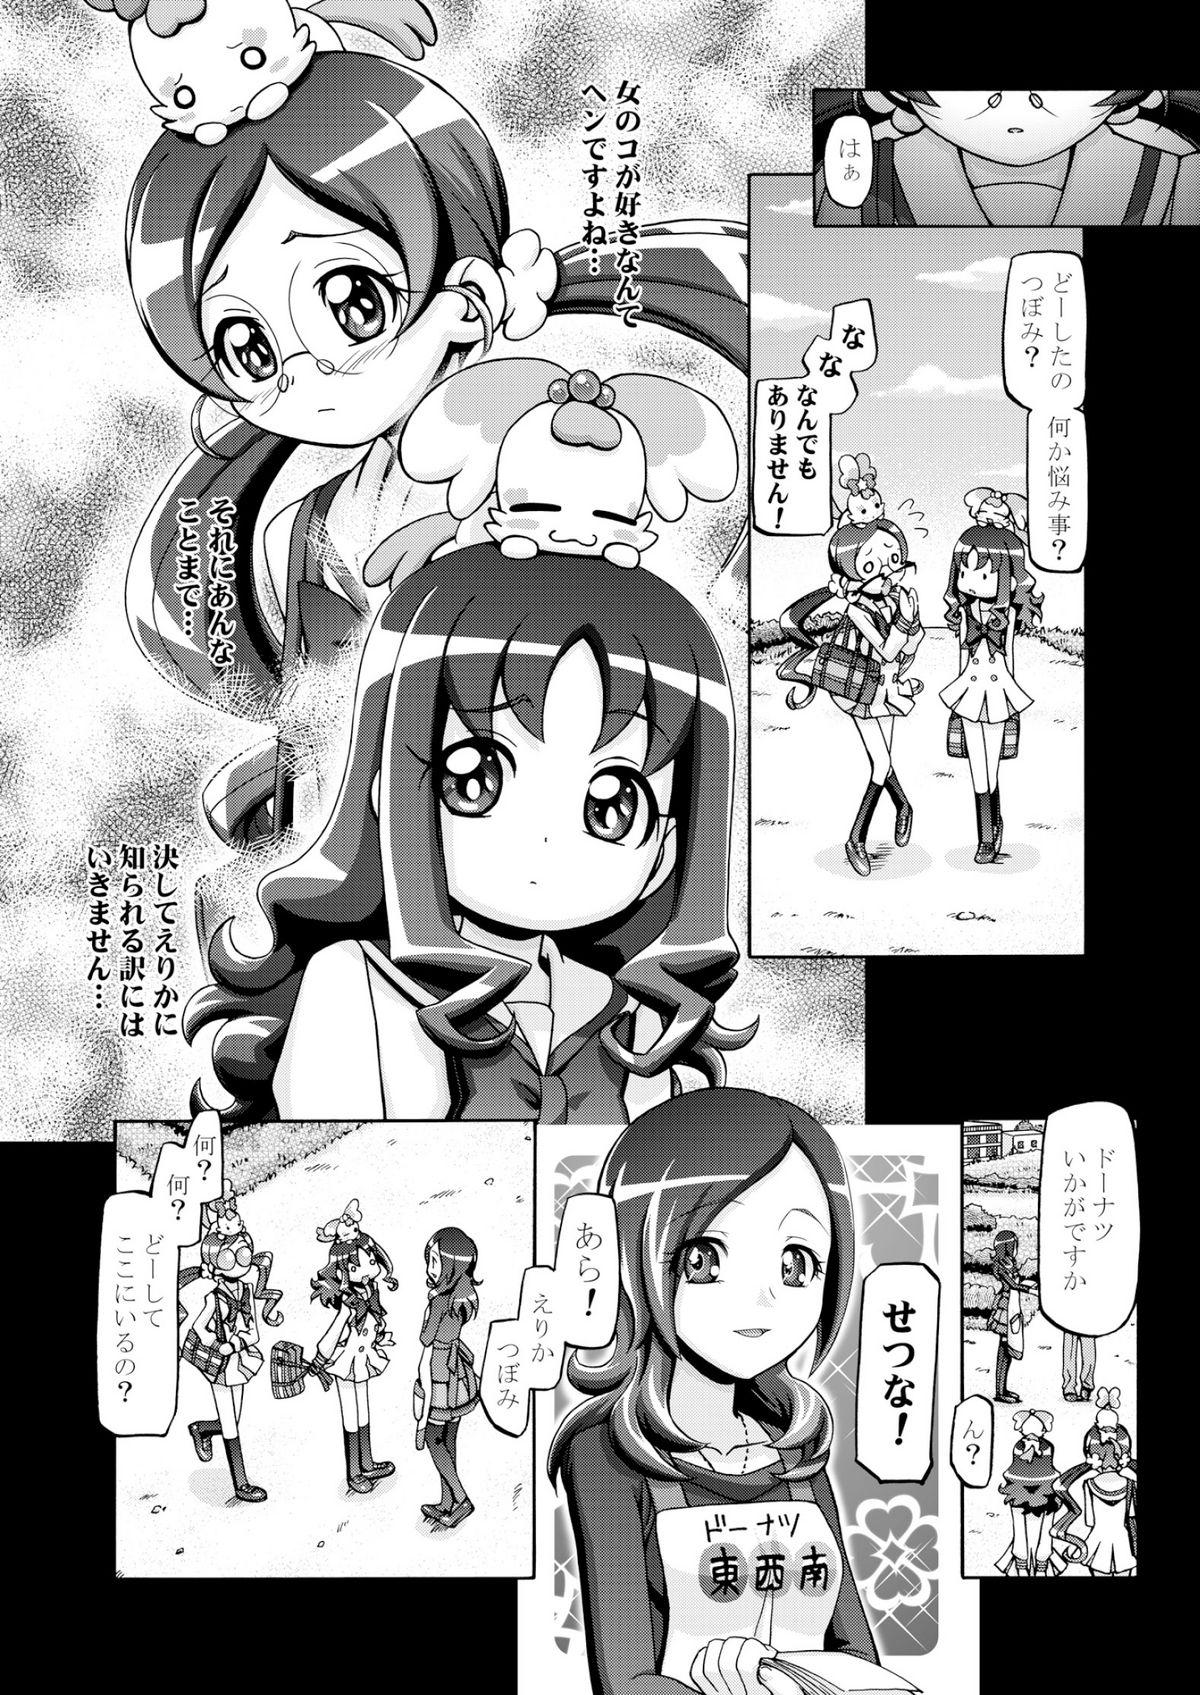 Guys Hato puni - Heartcatch precure Gay Outdoors - Page 9